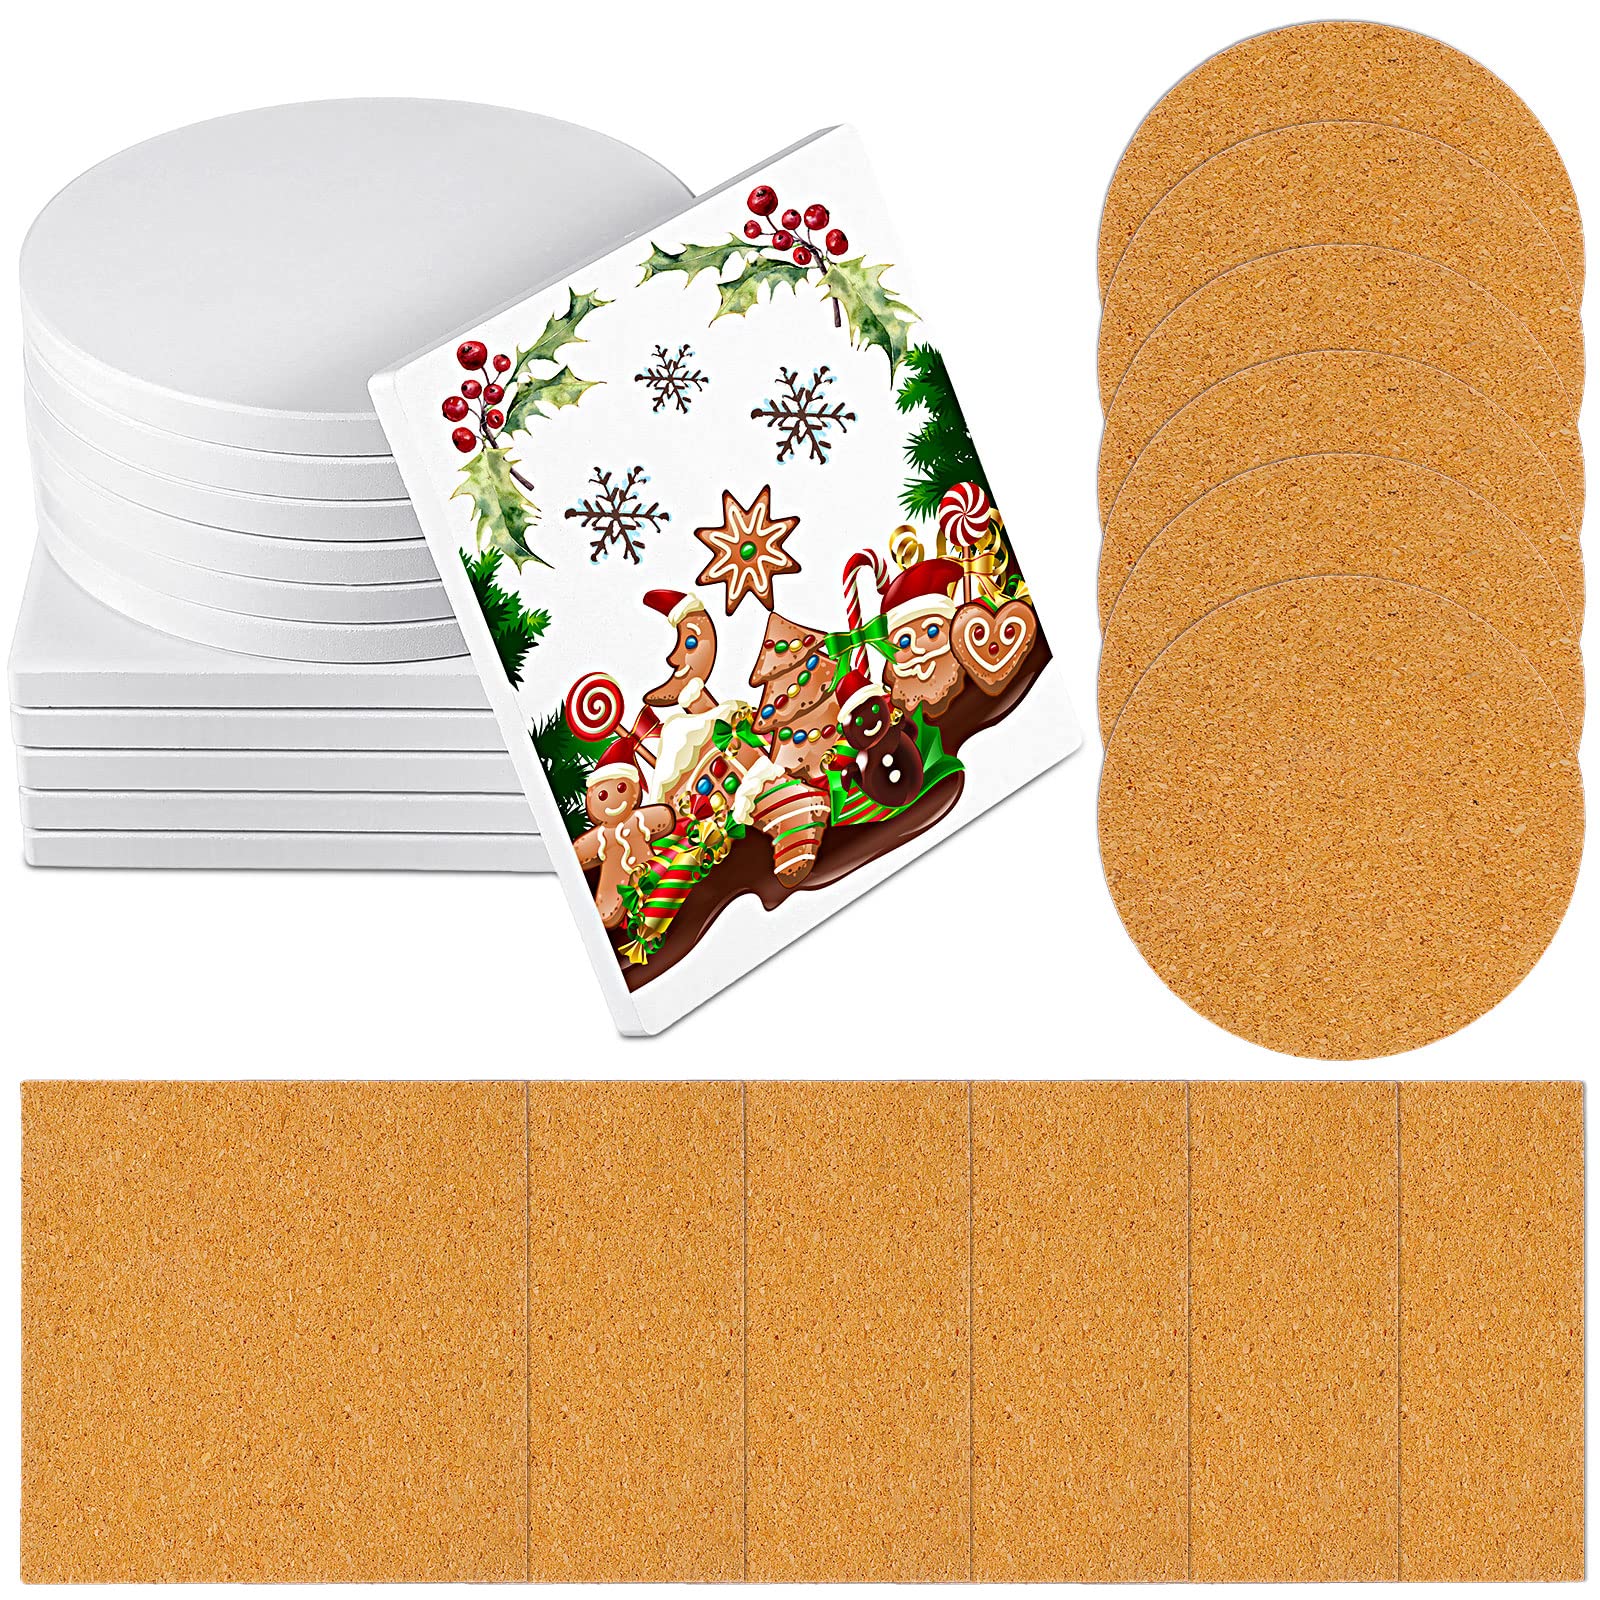 24 Pcs Ceramic Tiles for Crafts Coasters with Cork Backing Pads 4